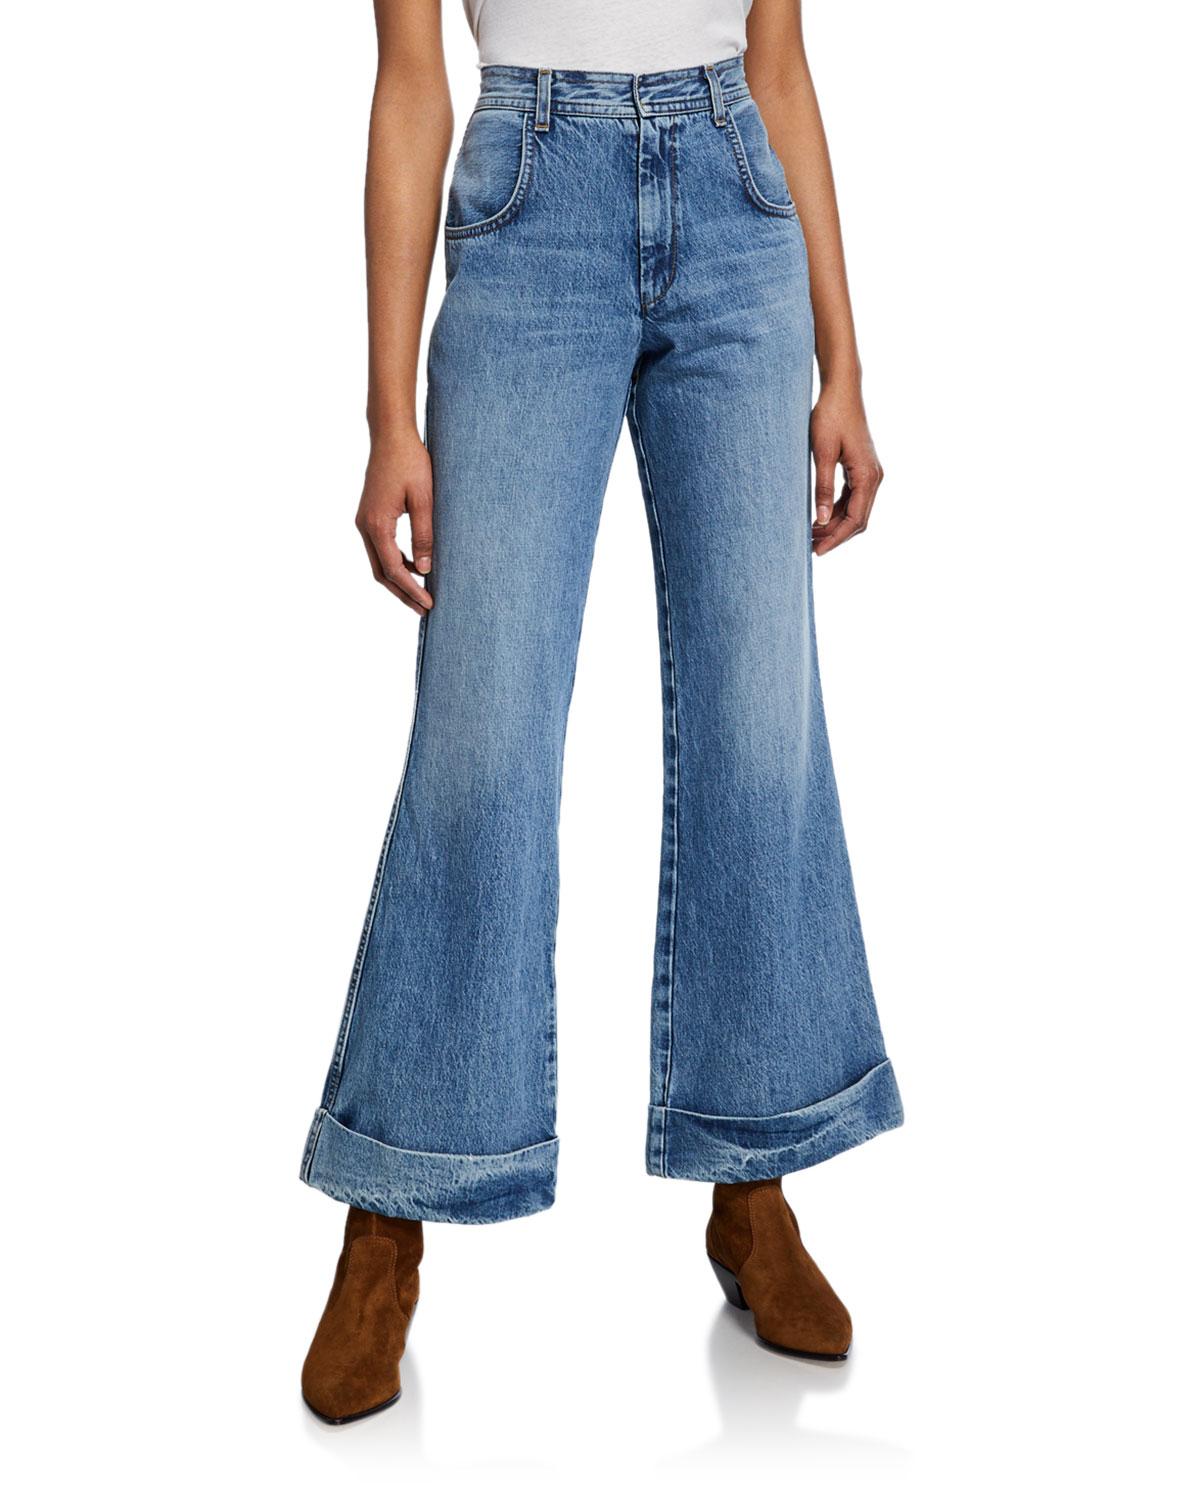 RE/DONE The 70s Ultra High-rise Cuffed Bell Bottom Jeans in Blue - Lyst